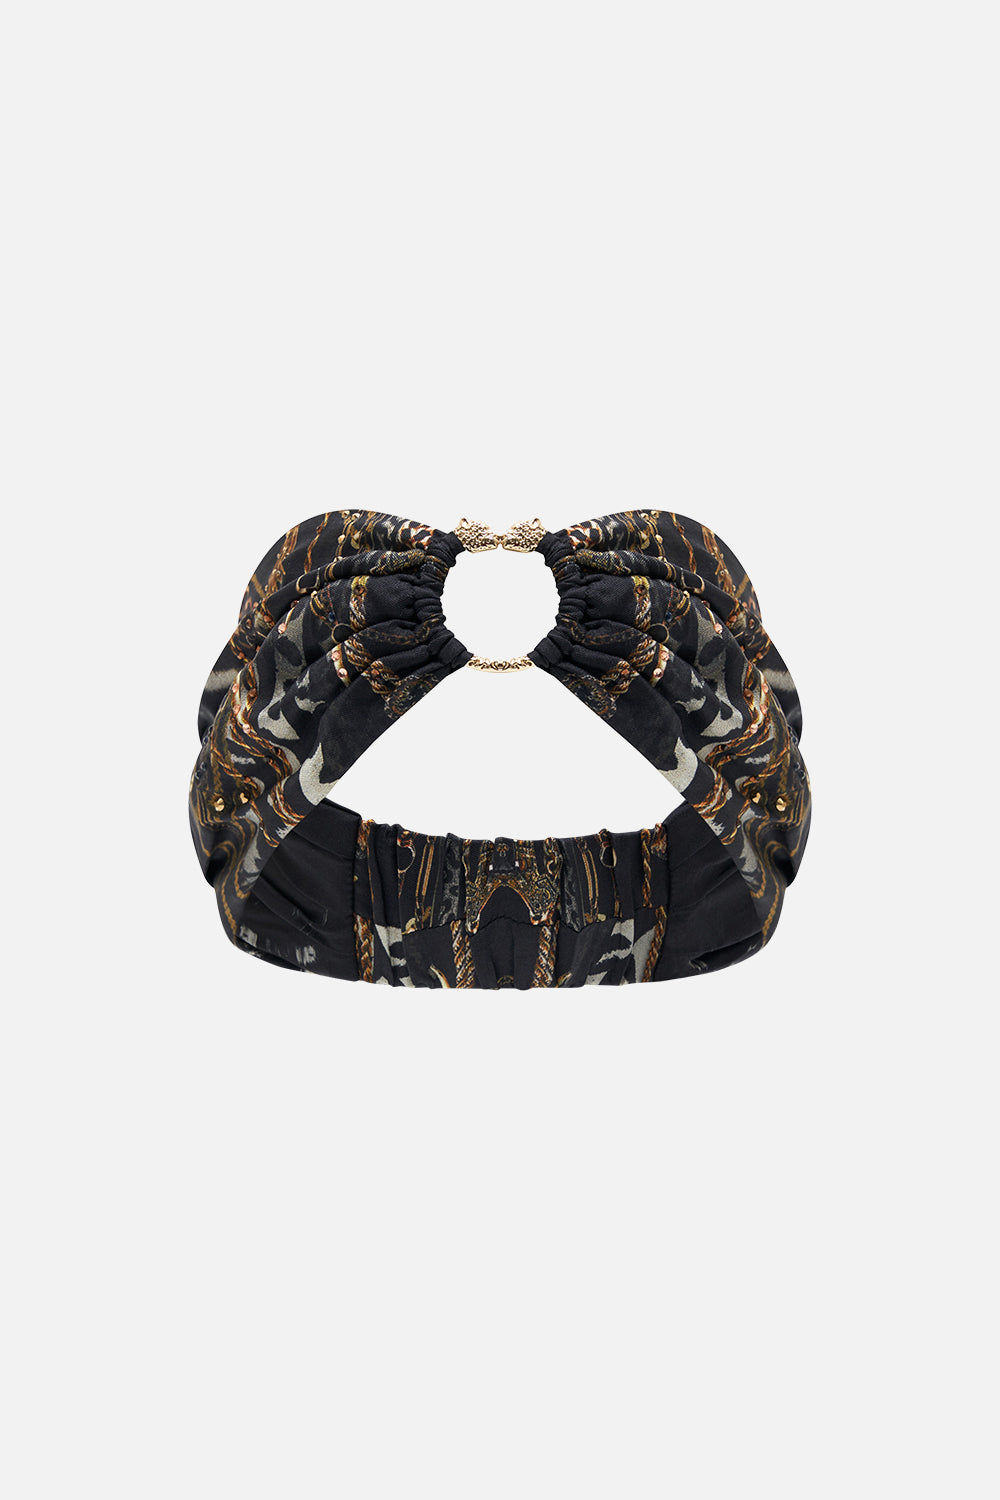 Product view of CAMILLA silk ring headband in Untamed Royalty print